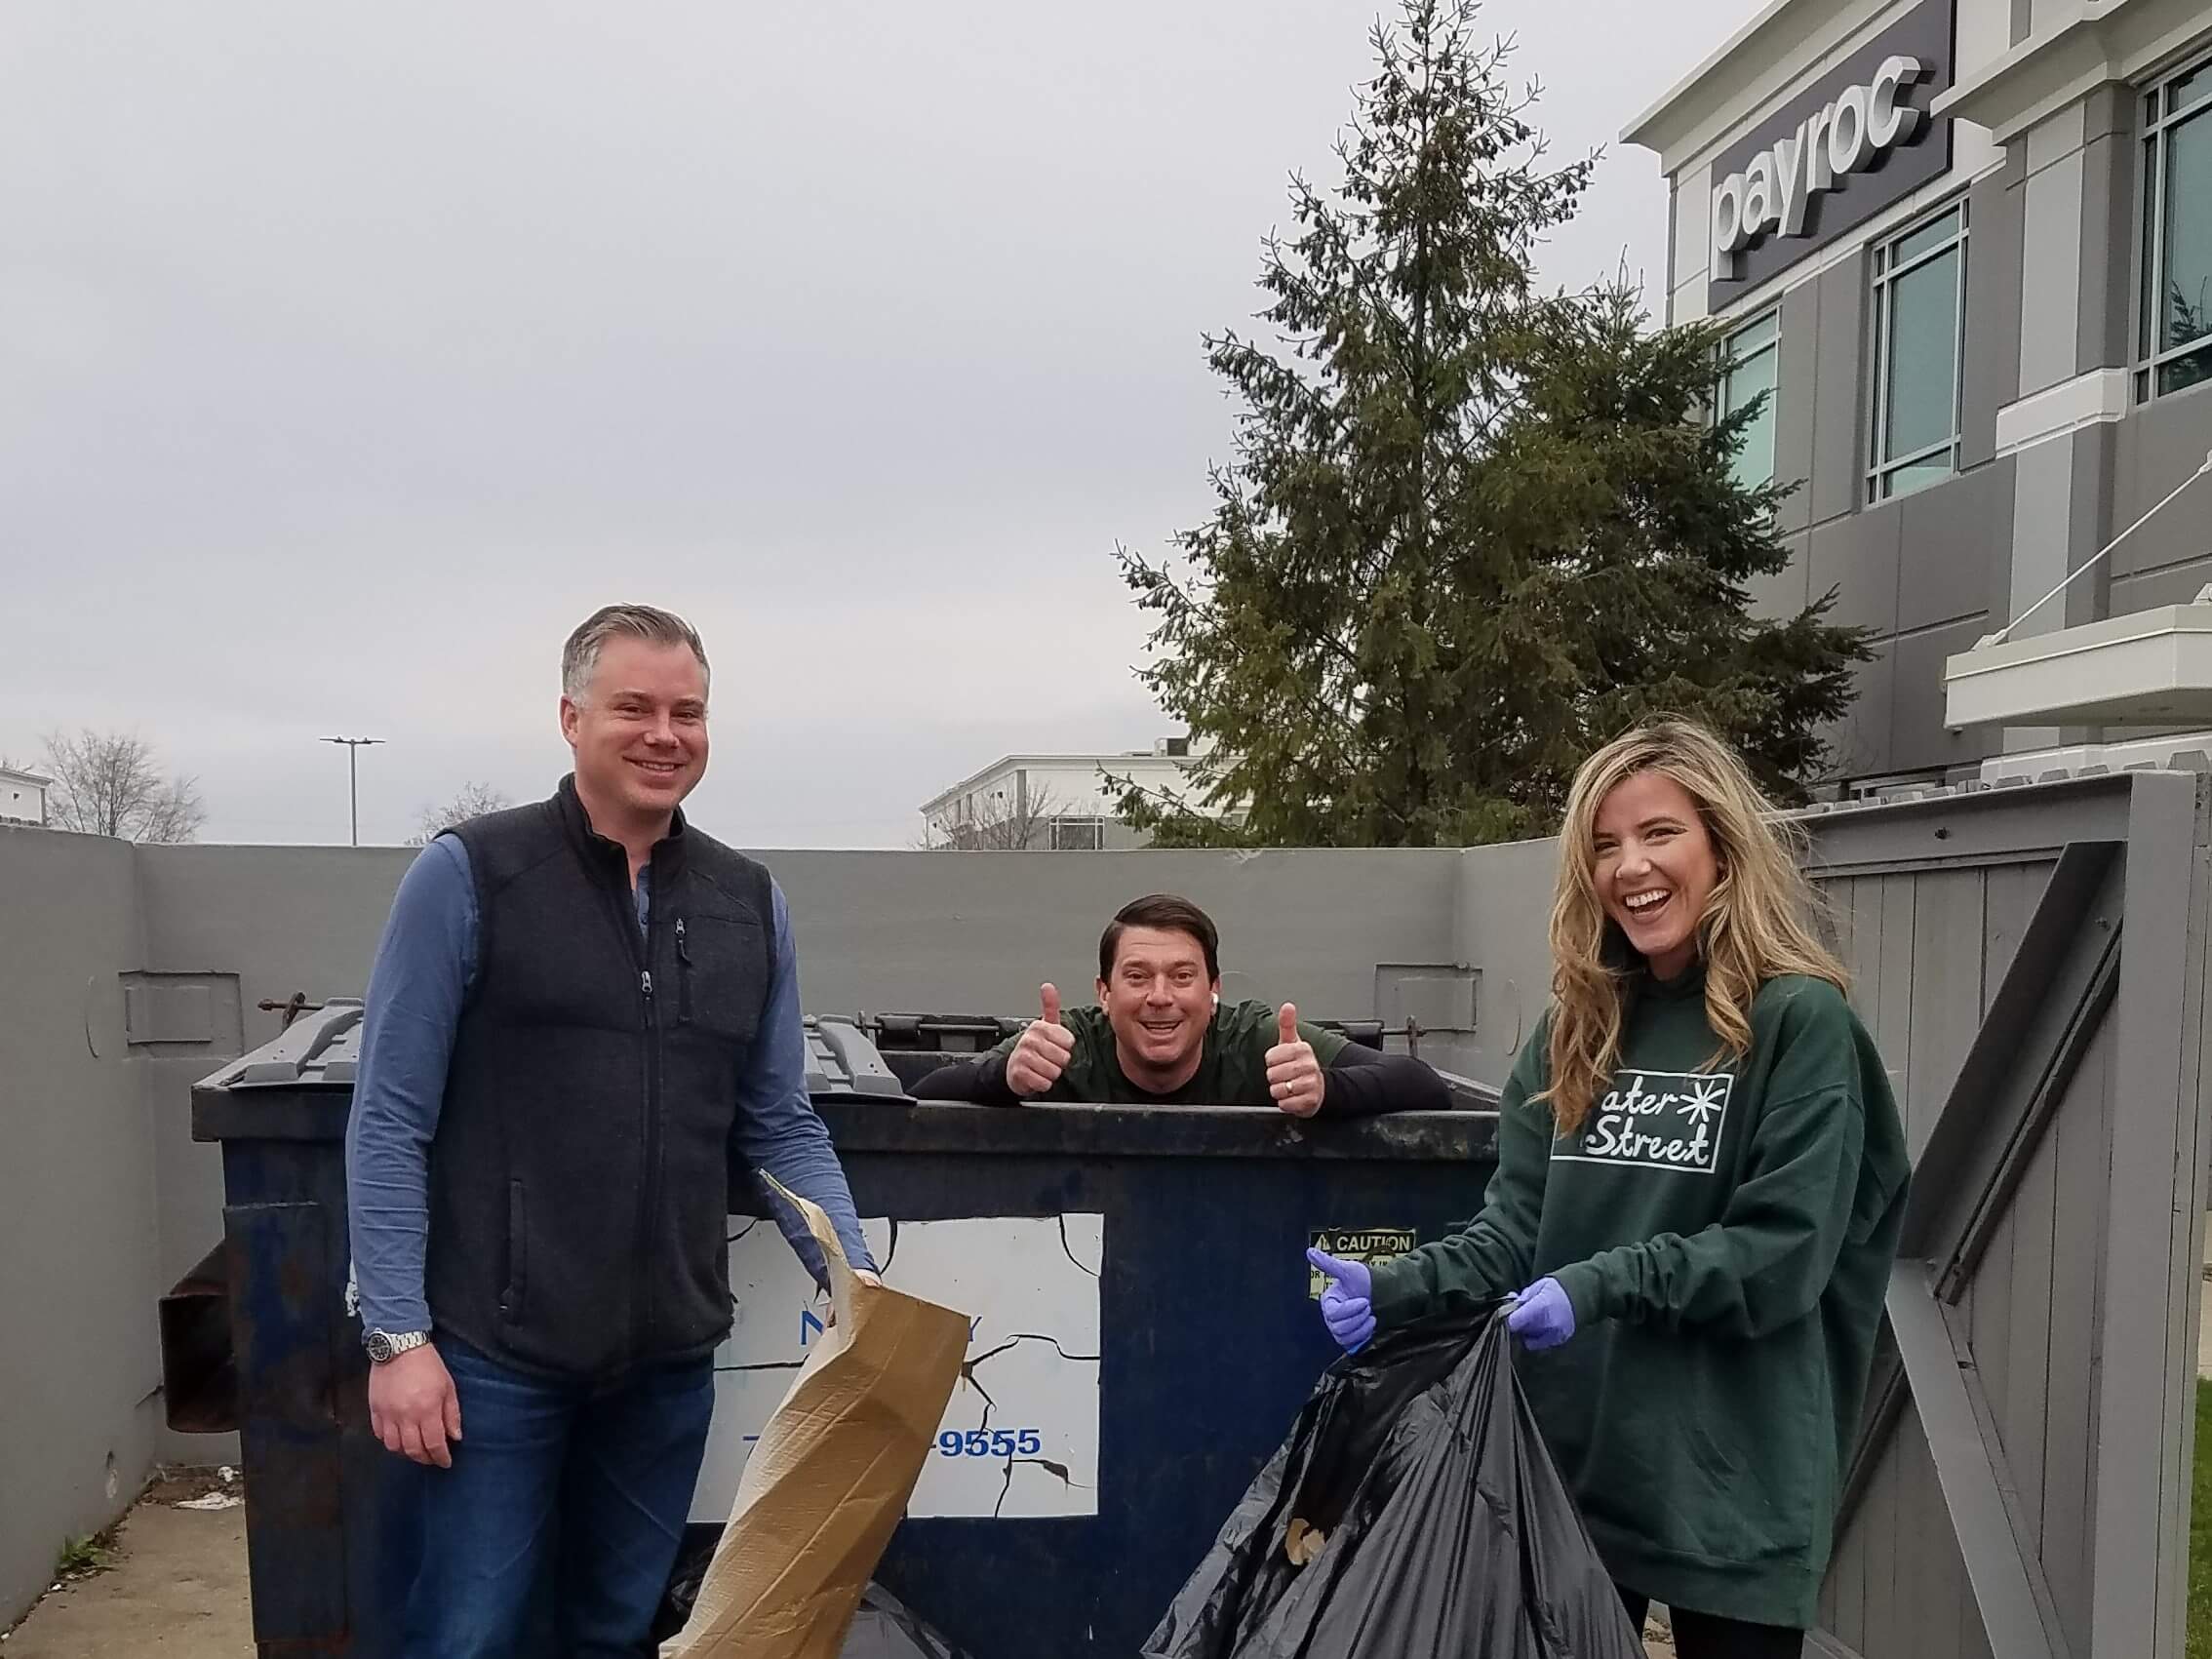 For Earth Day, Our Tinley Park office celebrated by doing garbage pick-up!